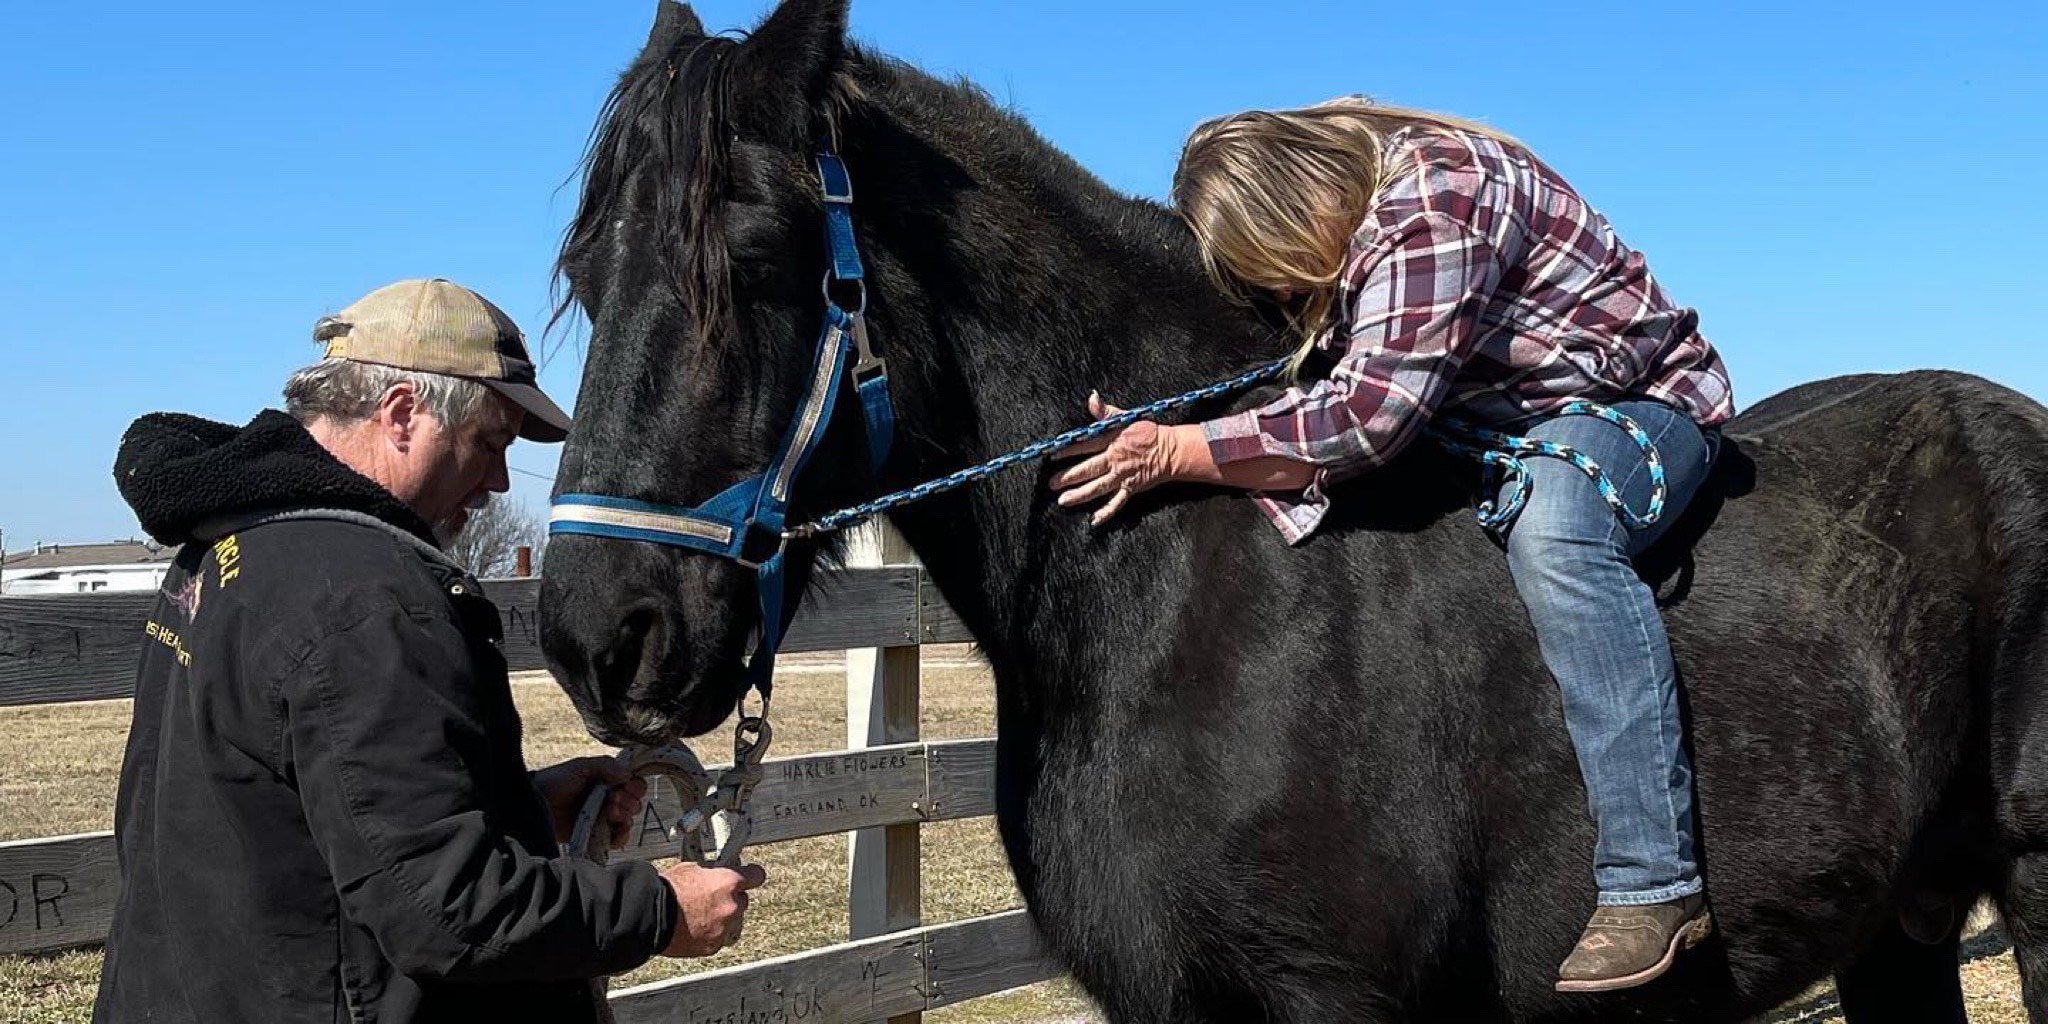 How Horses Healed and Saved Not One Life...But Two